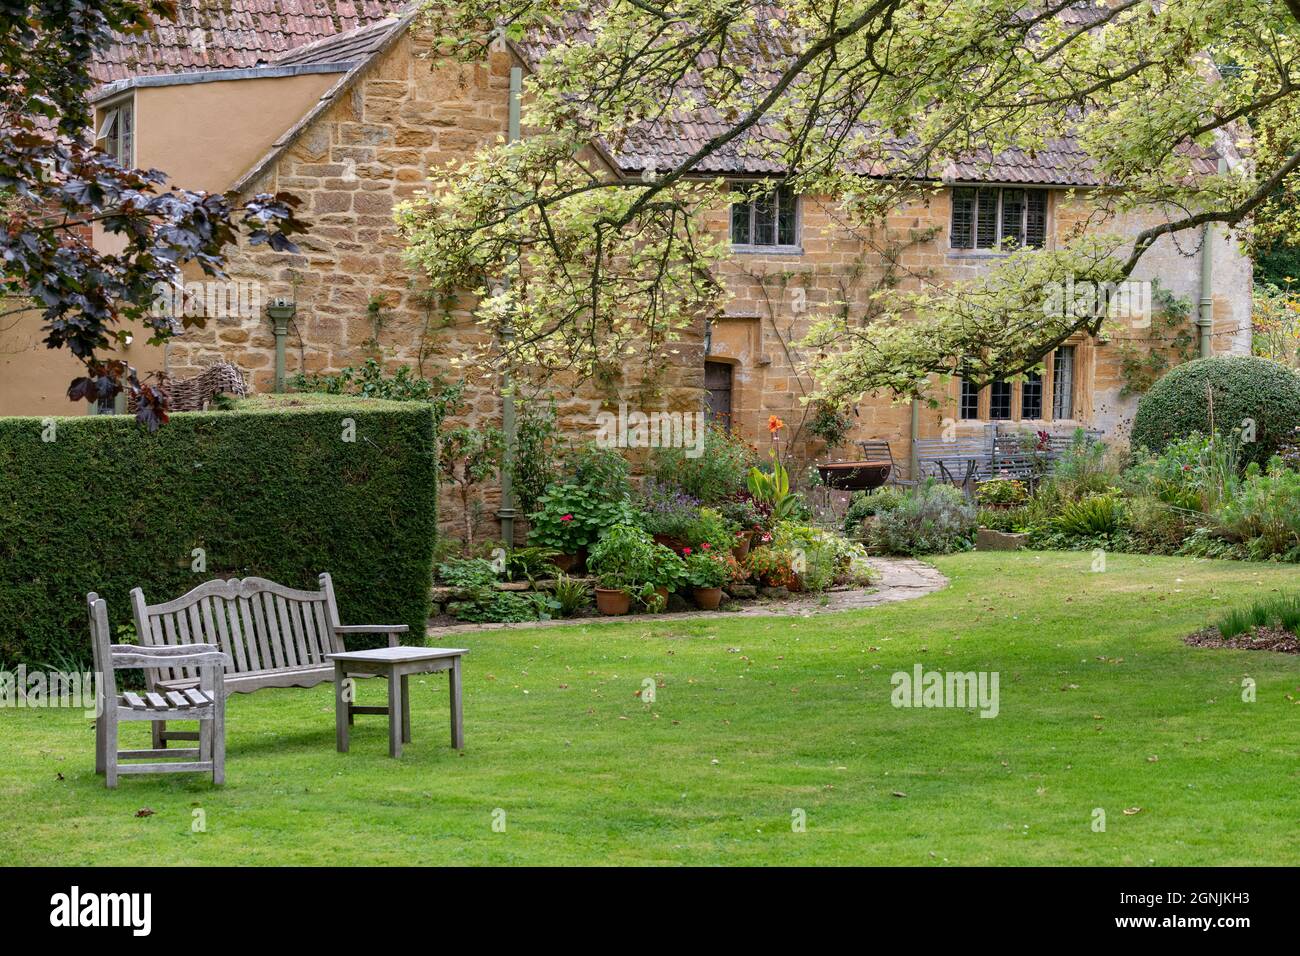 old stone cottage village  with wooden garden seat Stock Photo